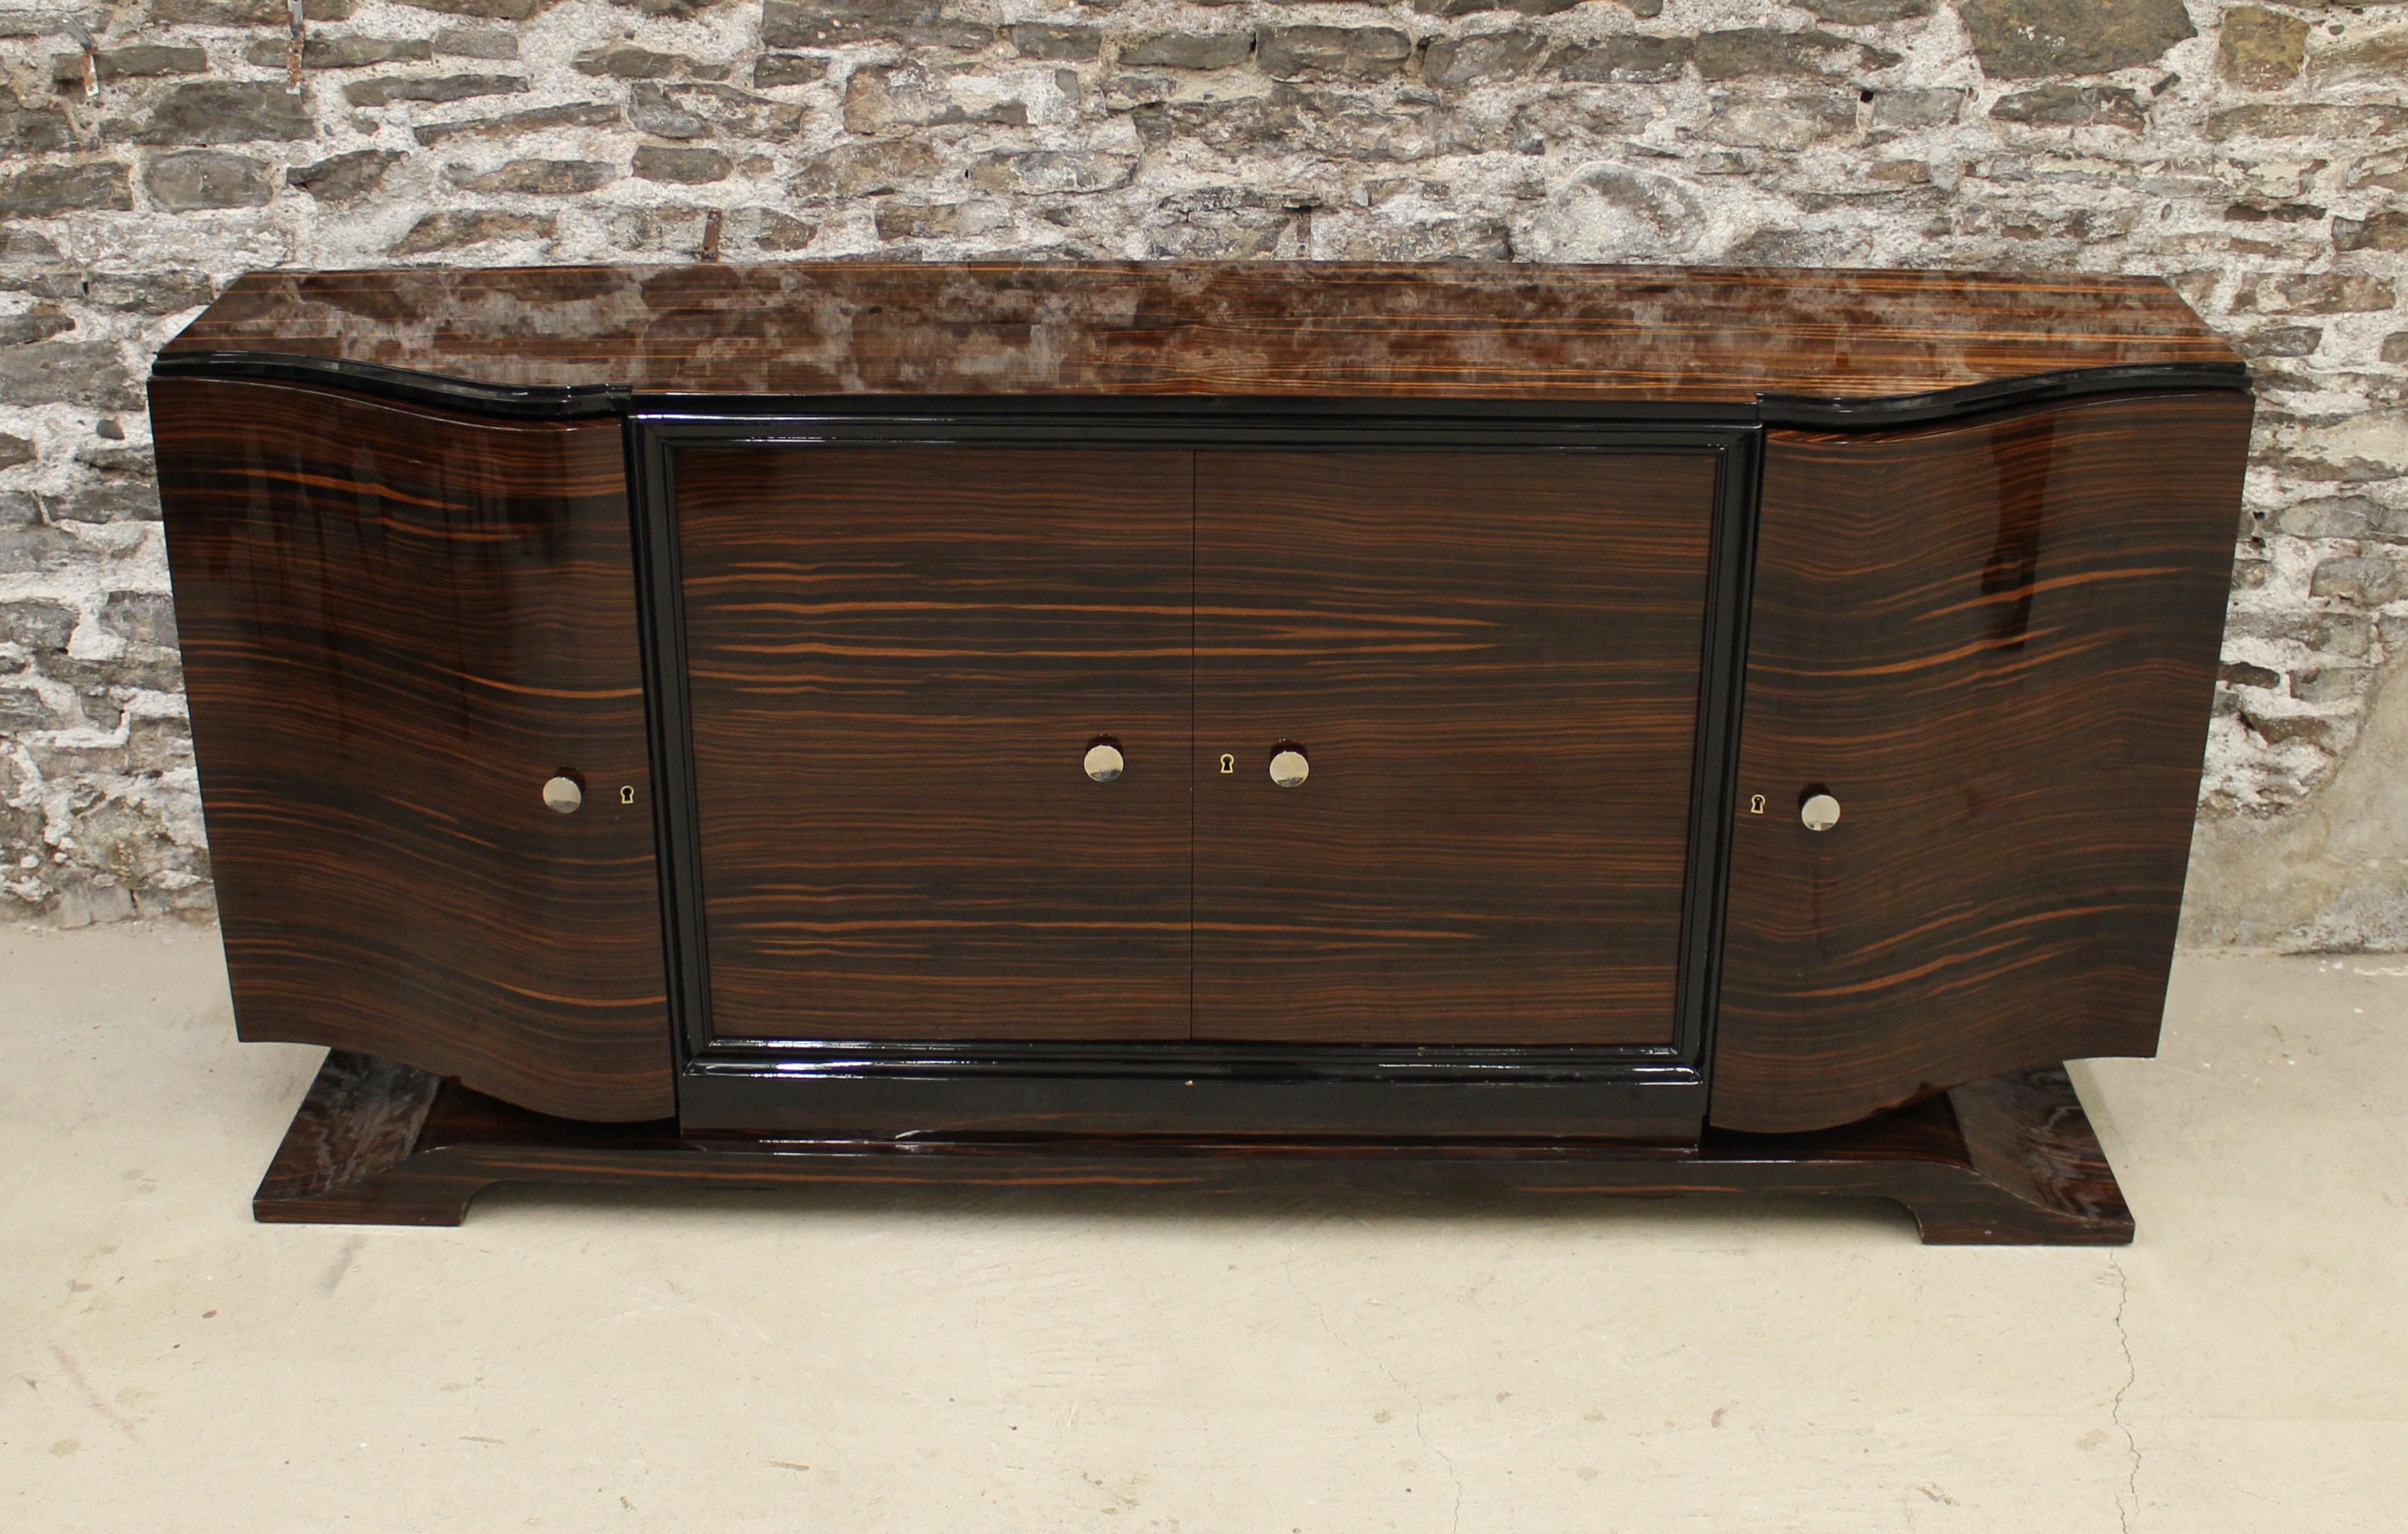 Art Deco Macassar ebony sideboard in the manner of Émile-Jacques Ruhlmann. This four-door credenza is elegantly bowed with stepped ebonized trim and chrome hardware.